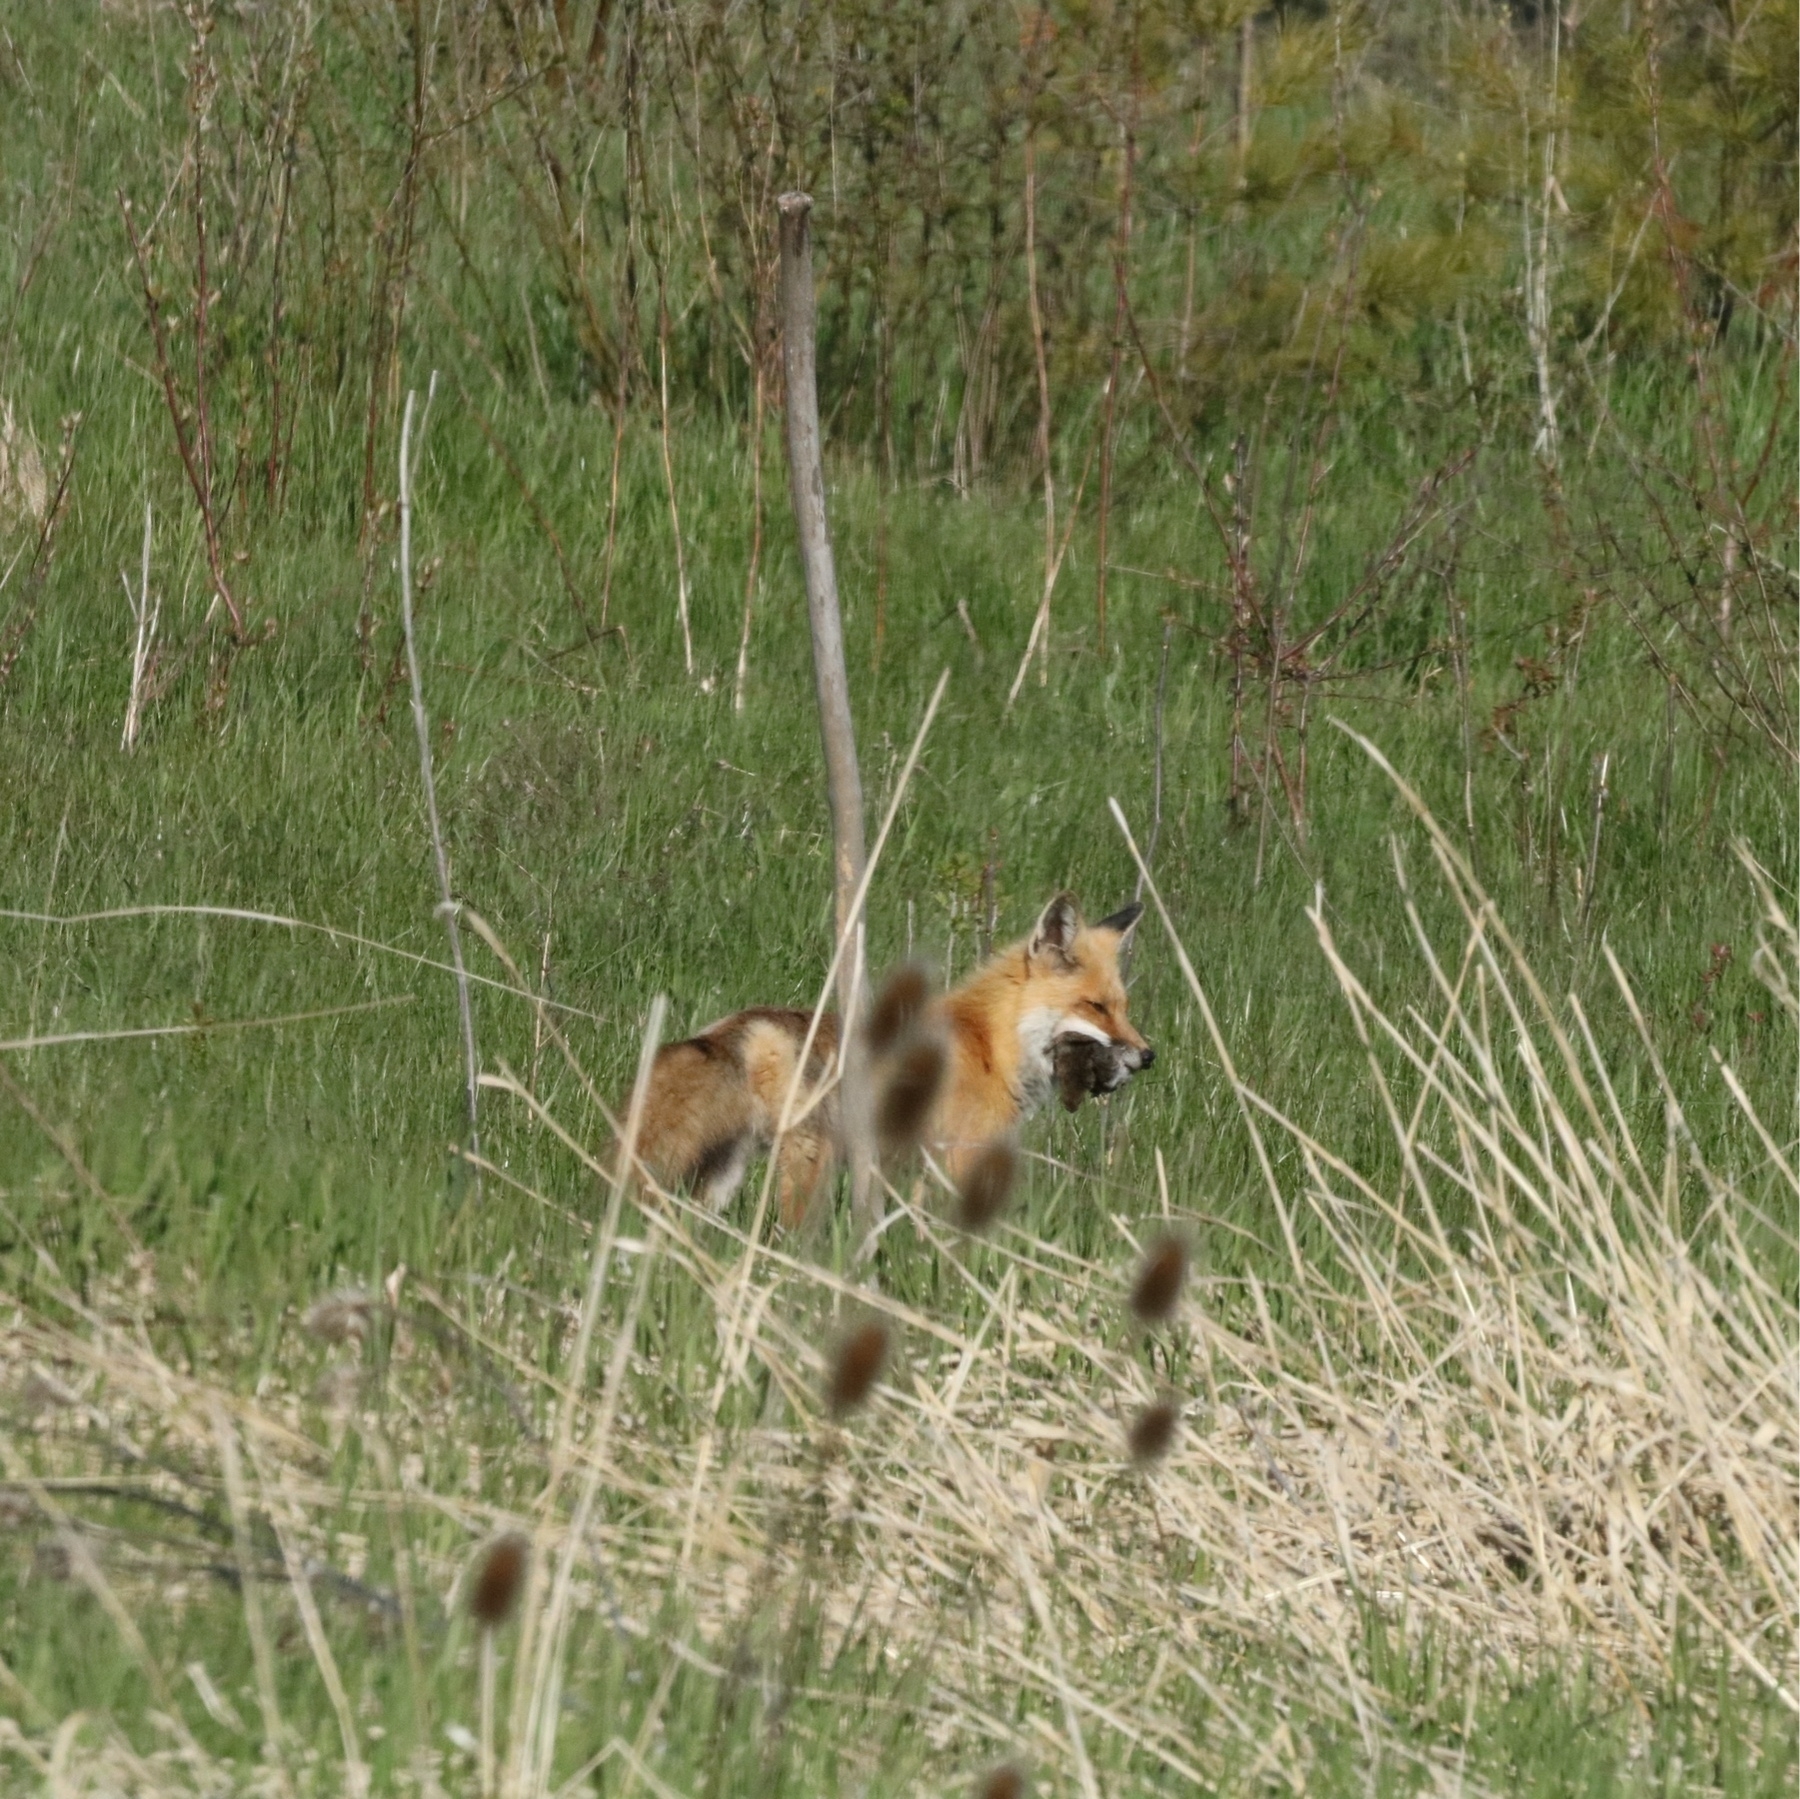 red fox with a furry animal in its mouth. it is surrounded by tall grass